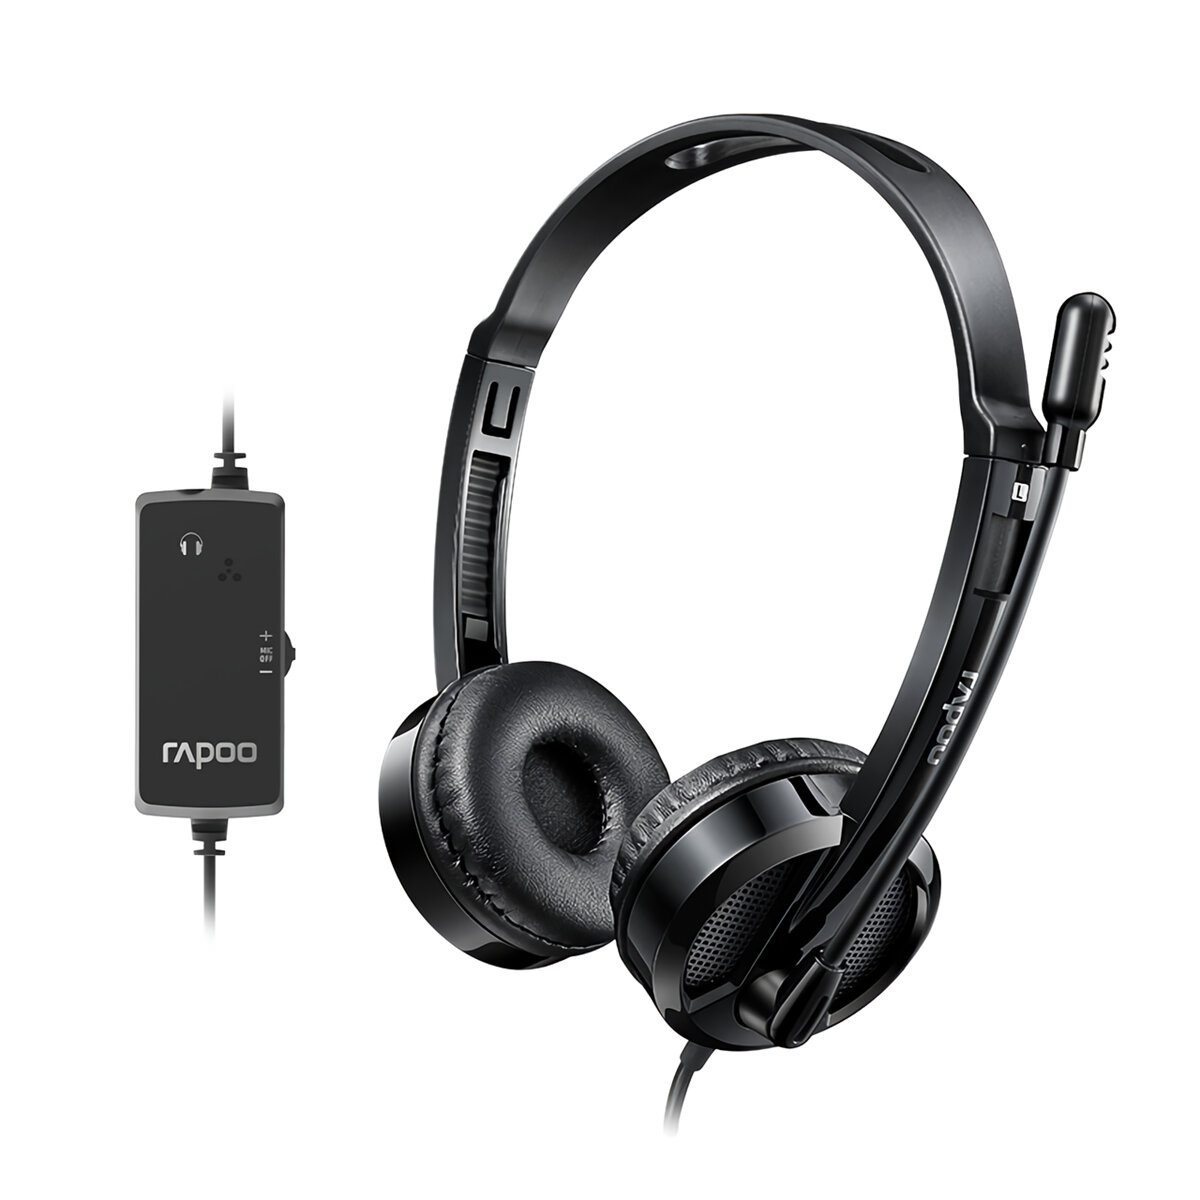 Rapoo H120 Wired Headset USB Stereo Sound Headphone with Noise Cancelling Microphone for Speech Online Class Teaching Voice Call